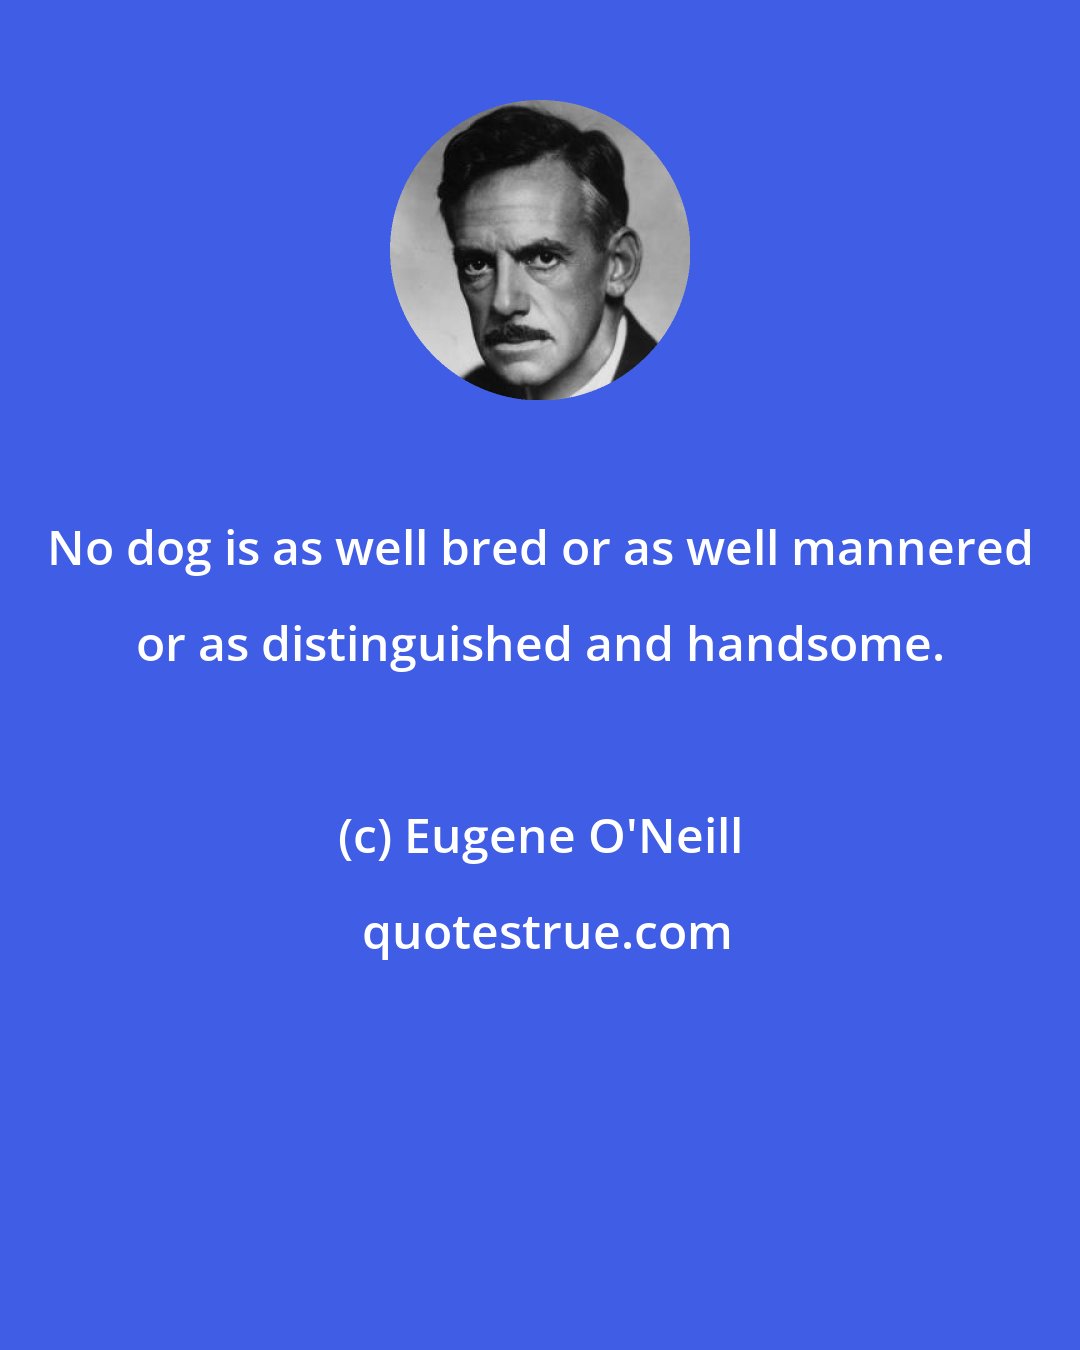 Eugene O'Neill: No dog is as well bred or as well mannered or as distinguished and handsome.